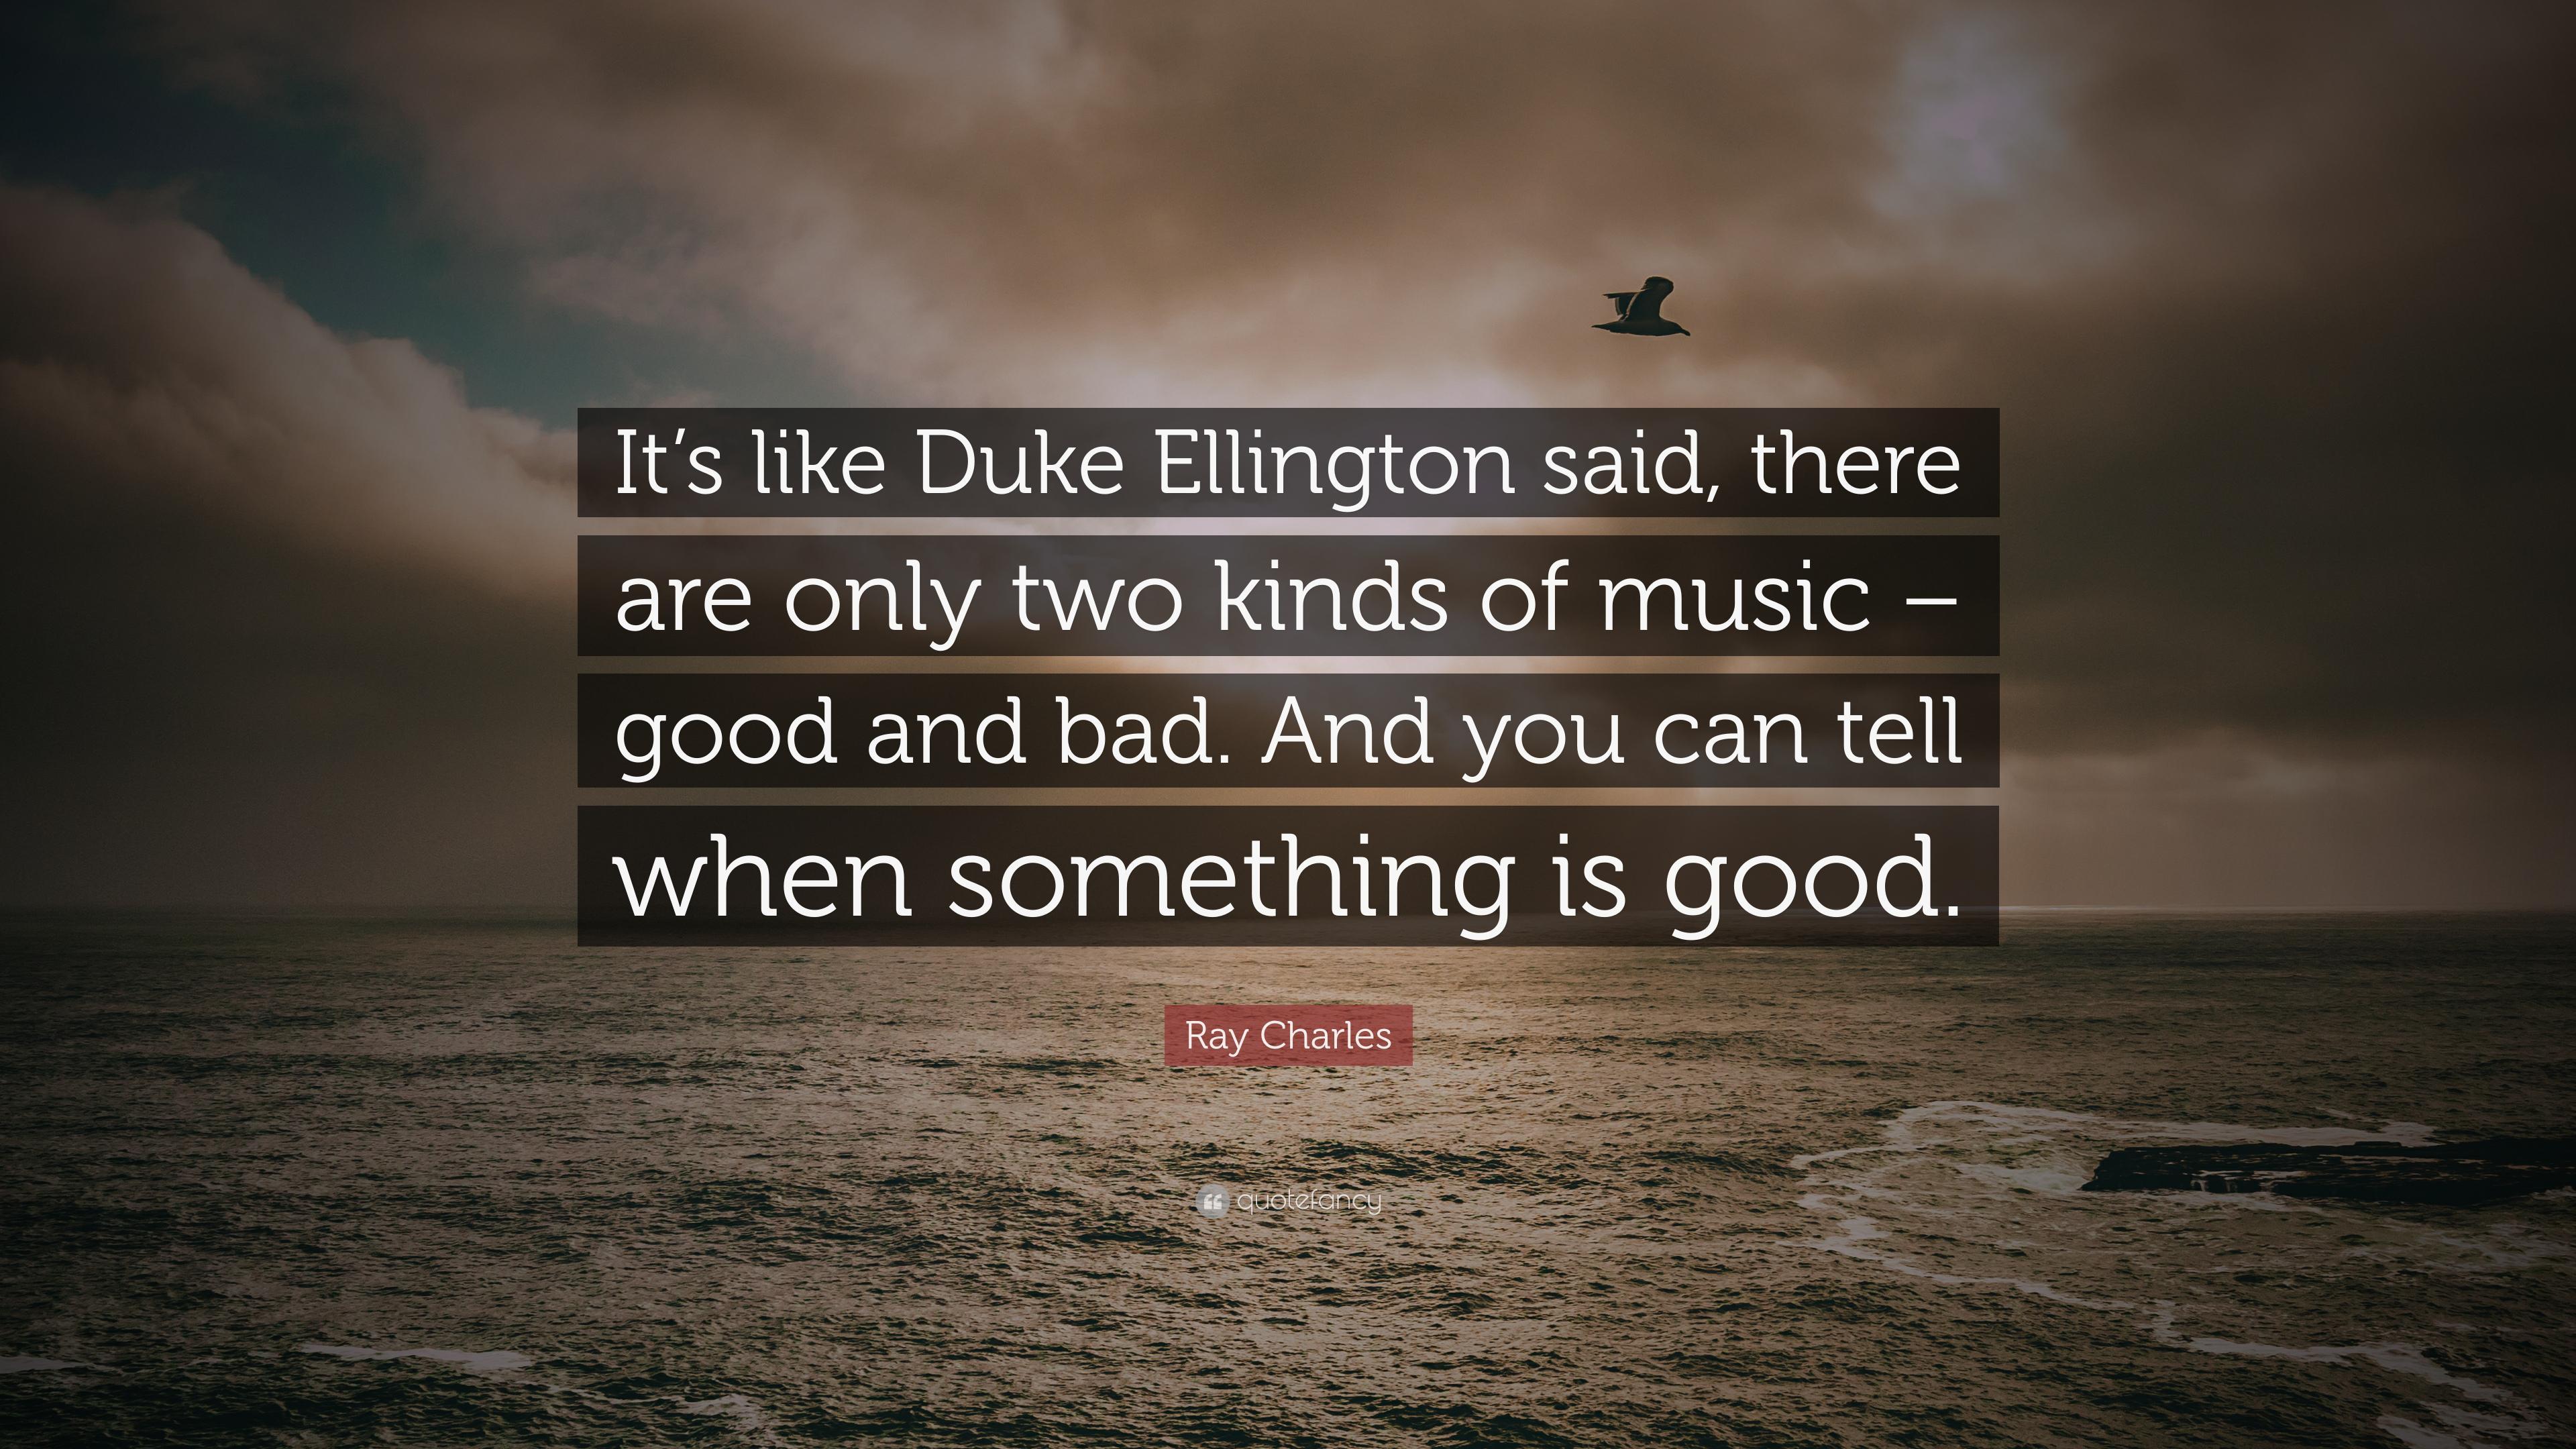 Ray Charles Quote: “It's like Duke Ellington said, there are